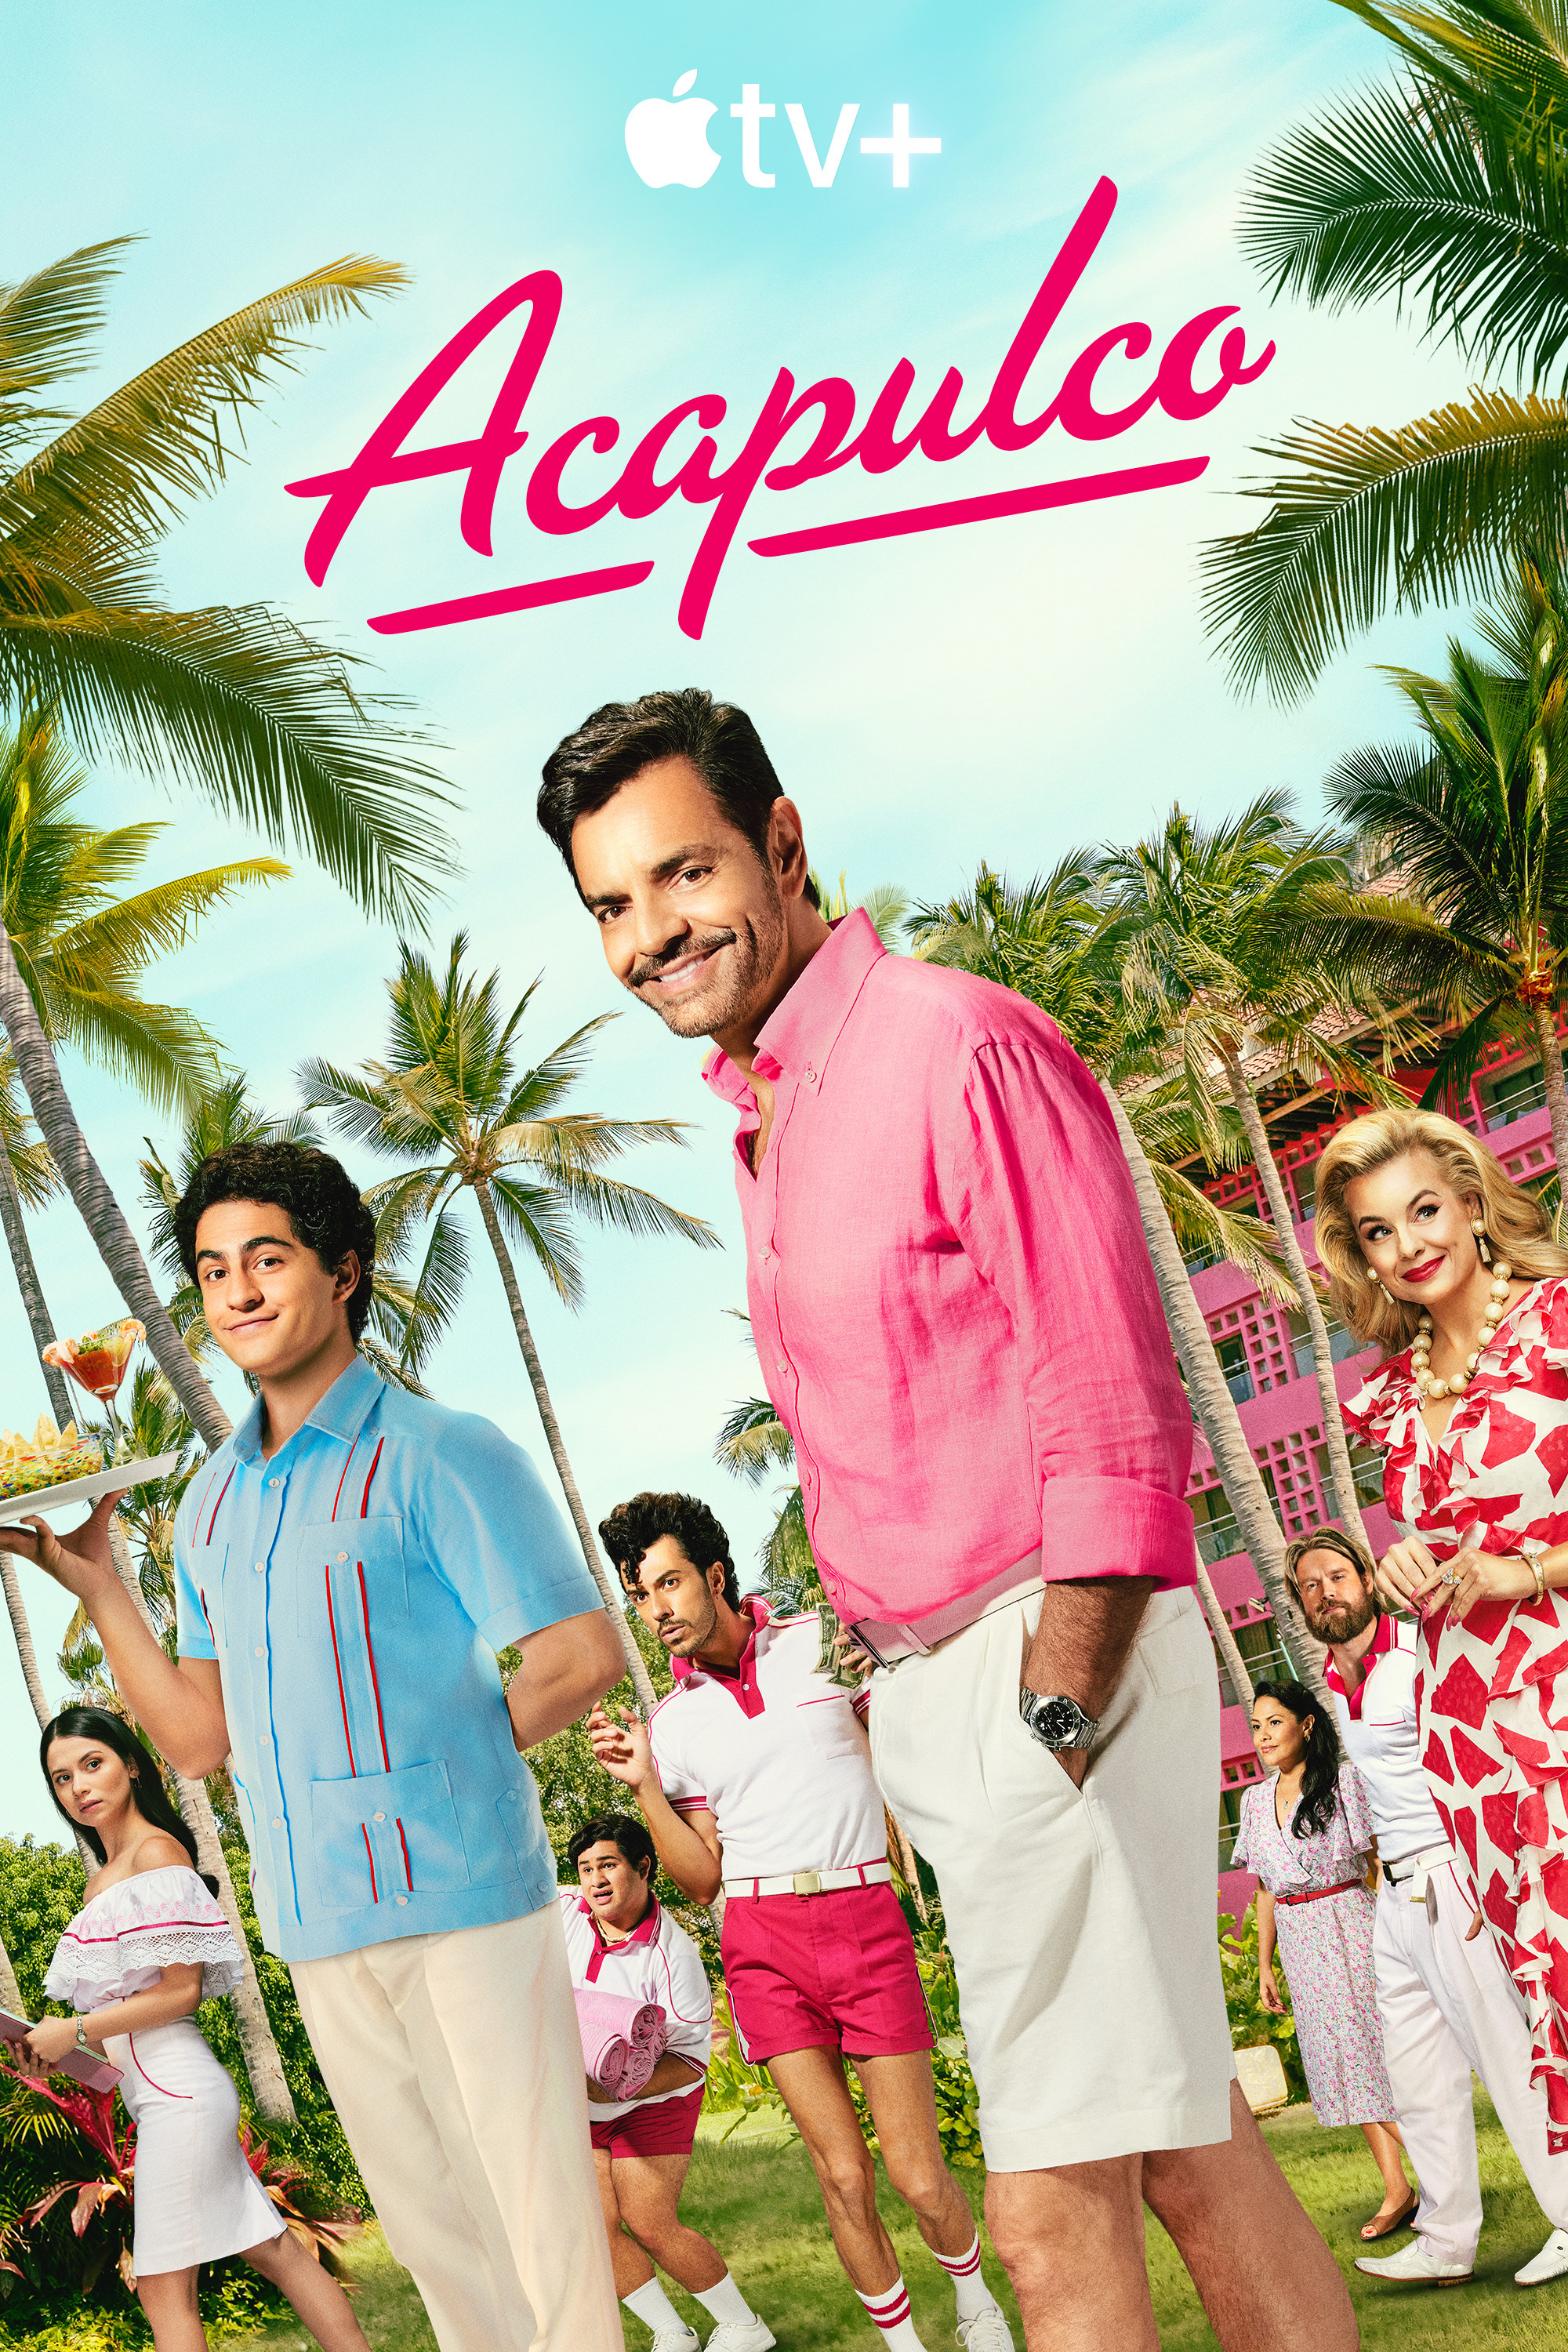 Mega Sized TV Poster Image for Acapulco (#3 of 3)